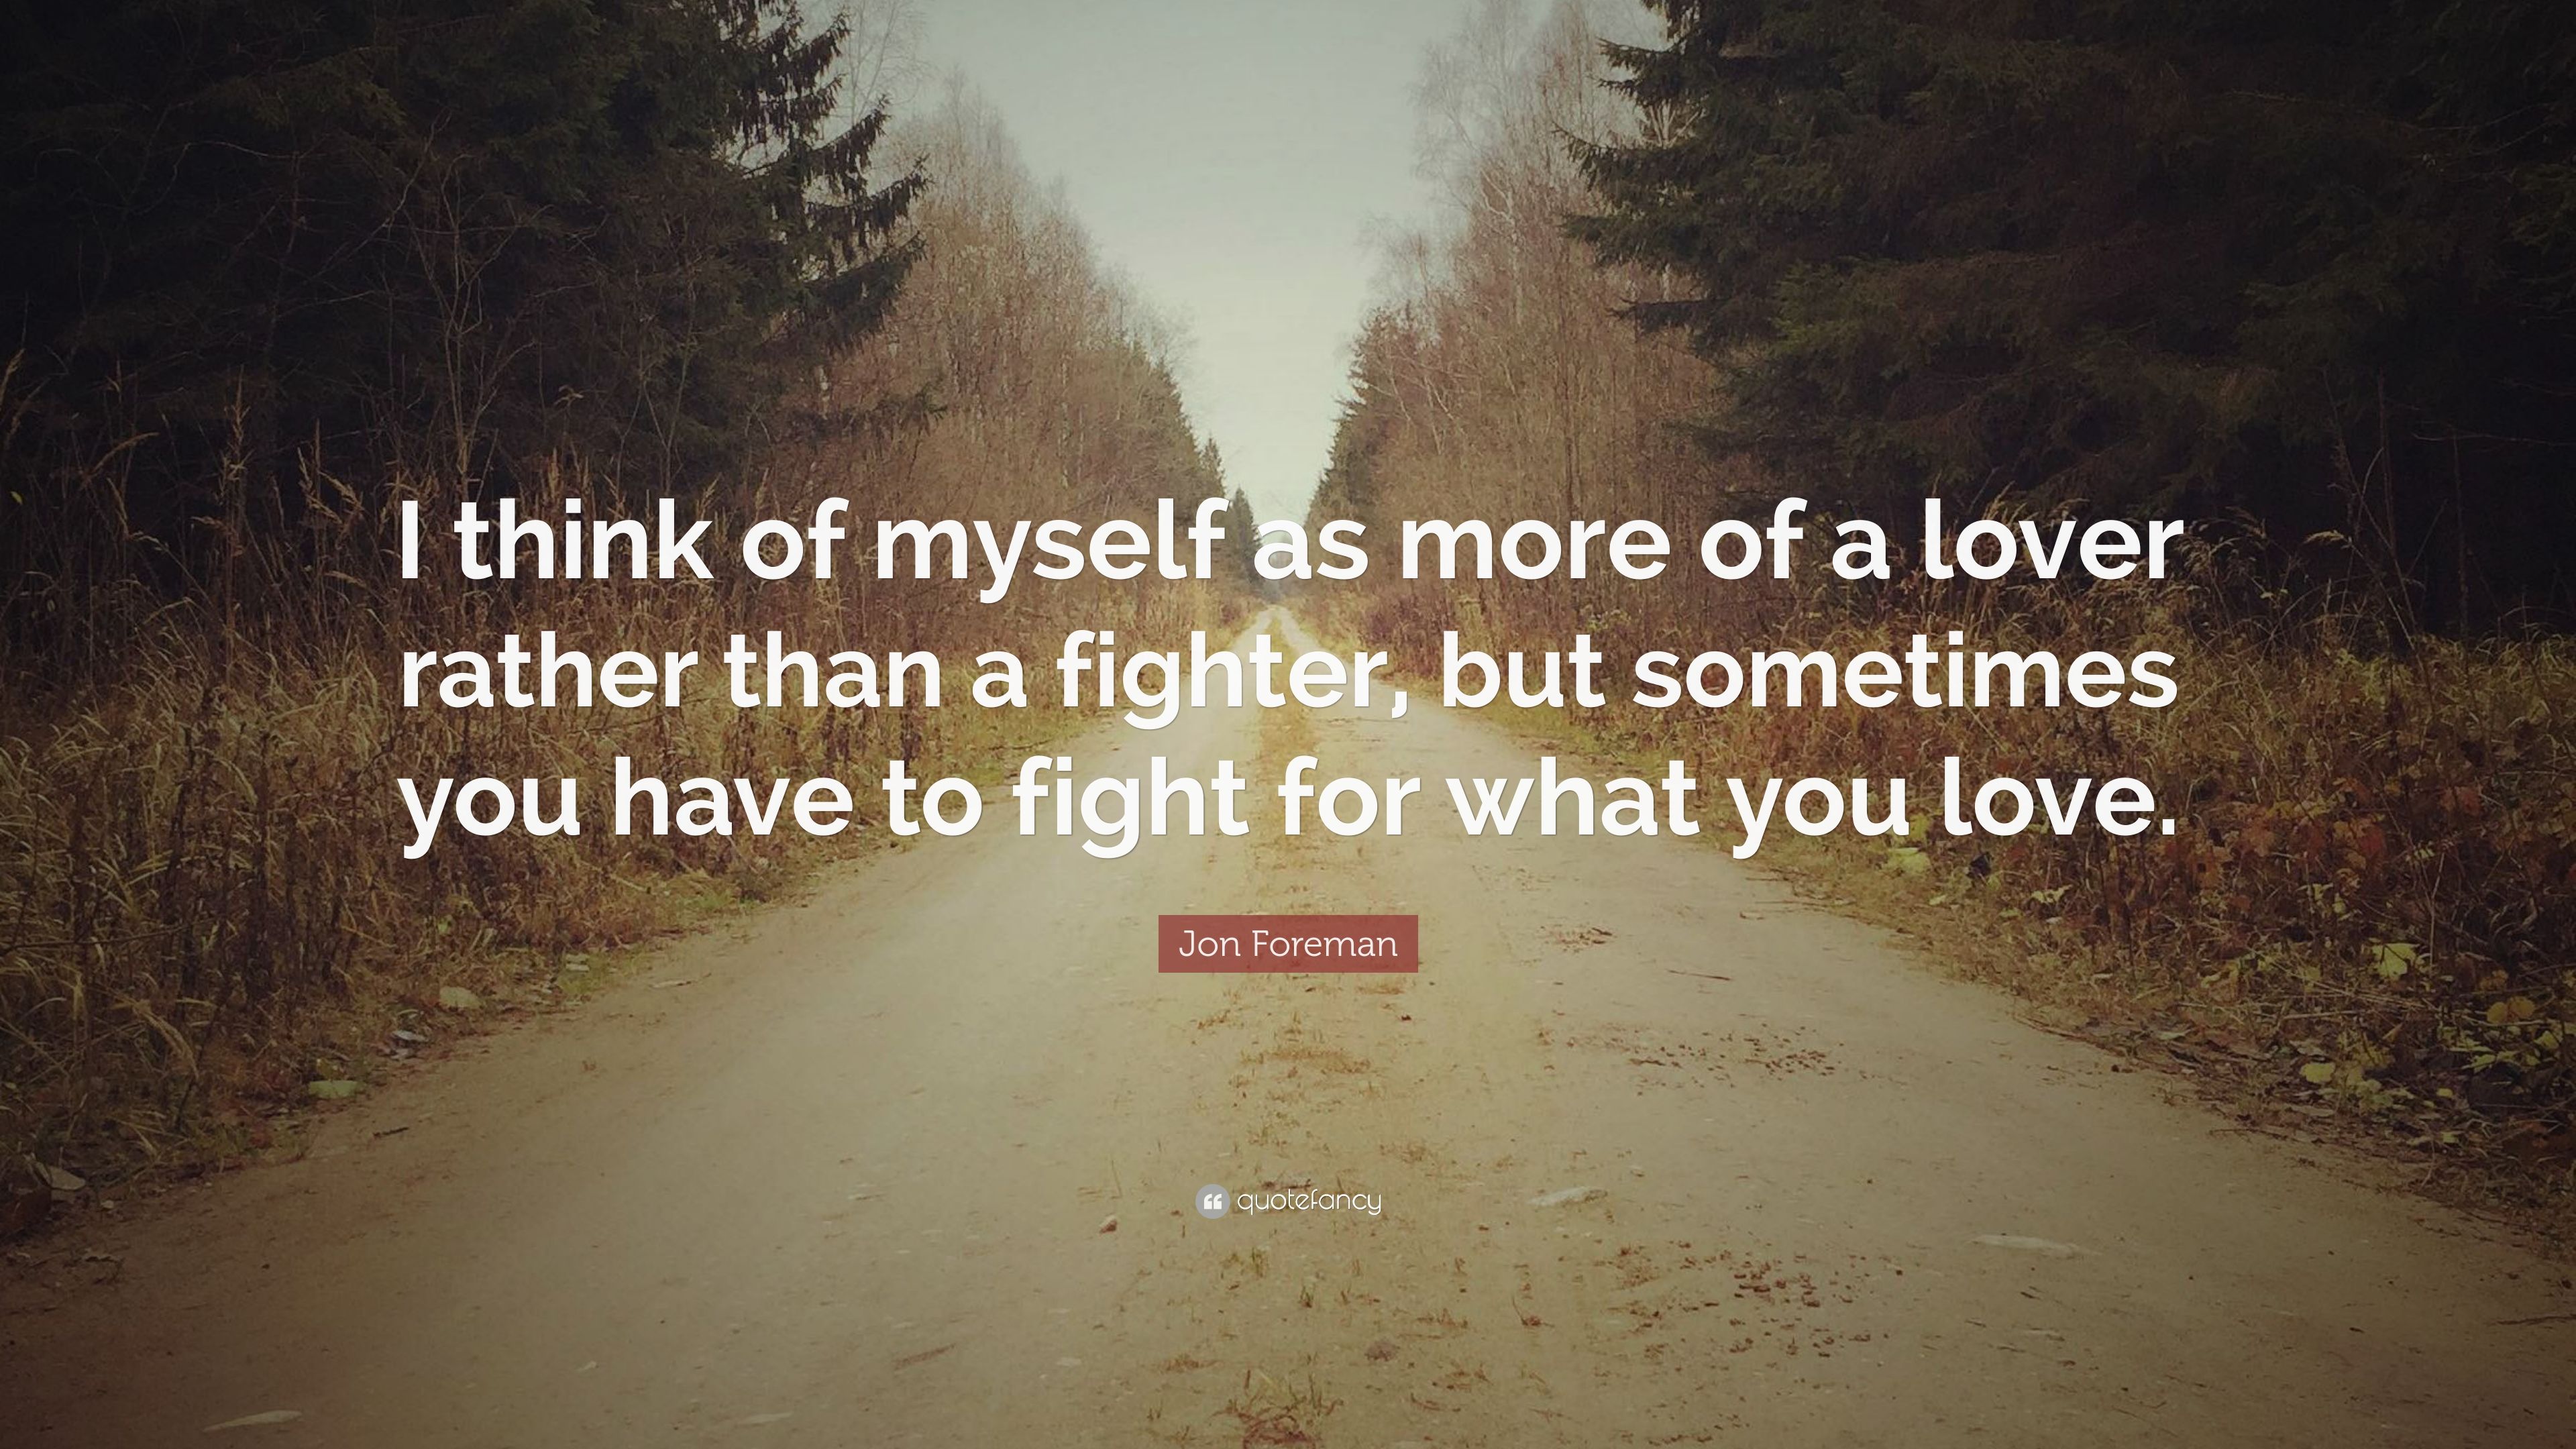 Jon Foreman Quote: “I think of myself as more of a lover rather than ...